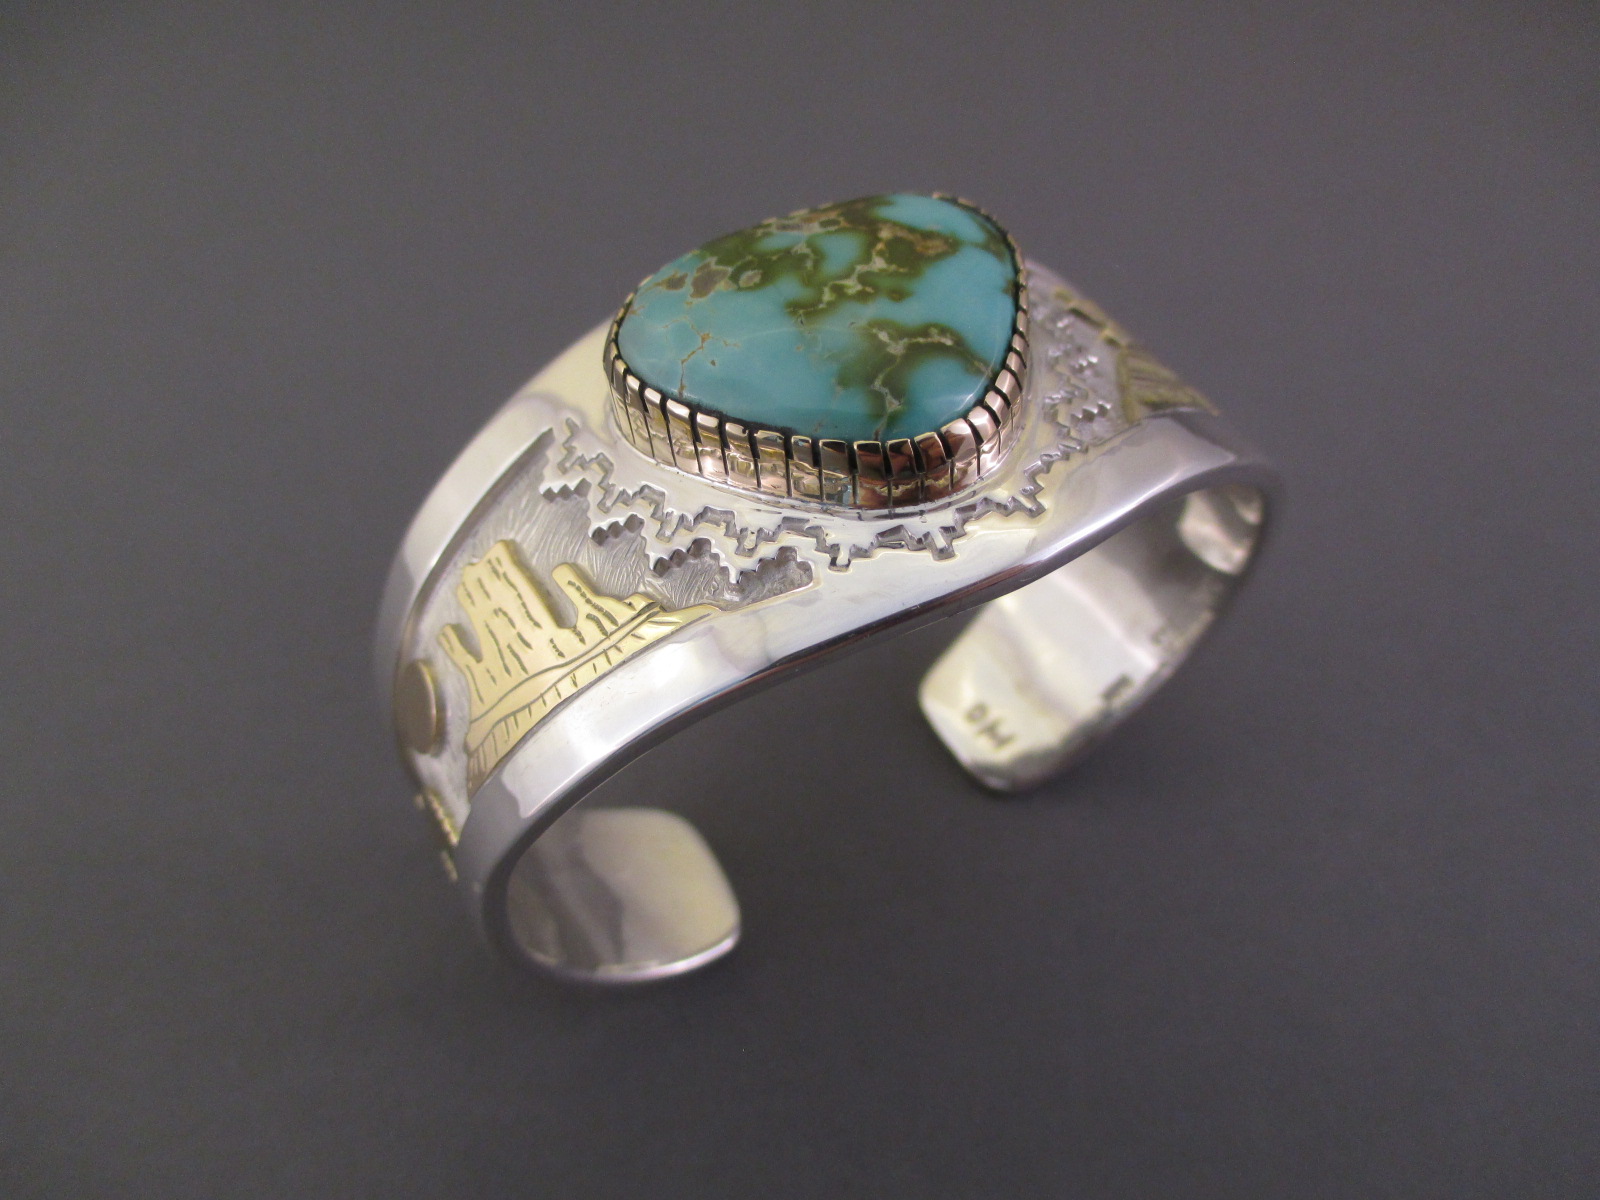 Sterling Silver & Royston Turquoise & 14kt Gold Cuff Bracelet by Native American jewelry artist, Dina Huntinghorse $1,400-